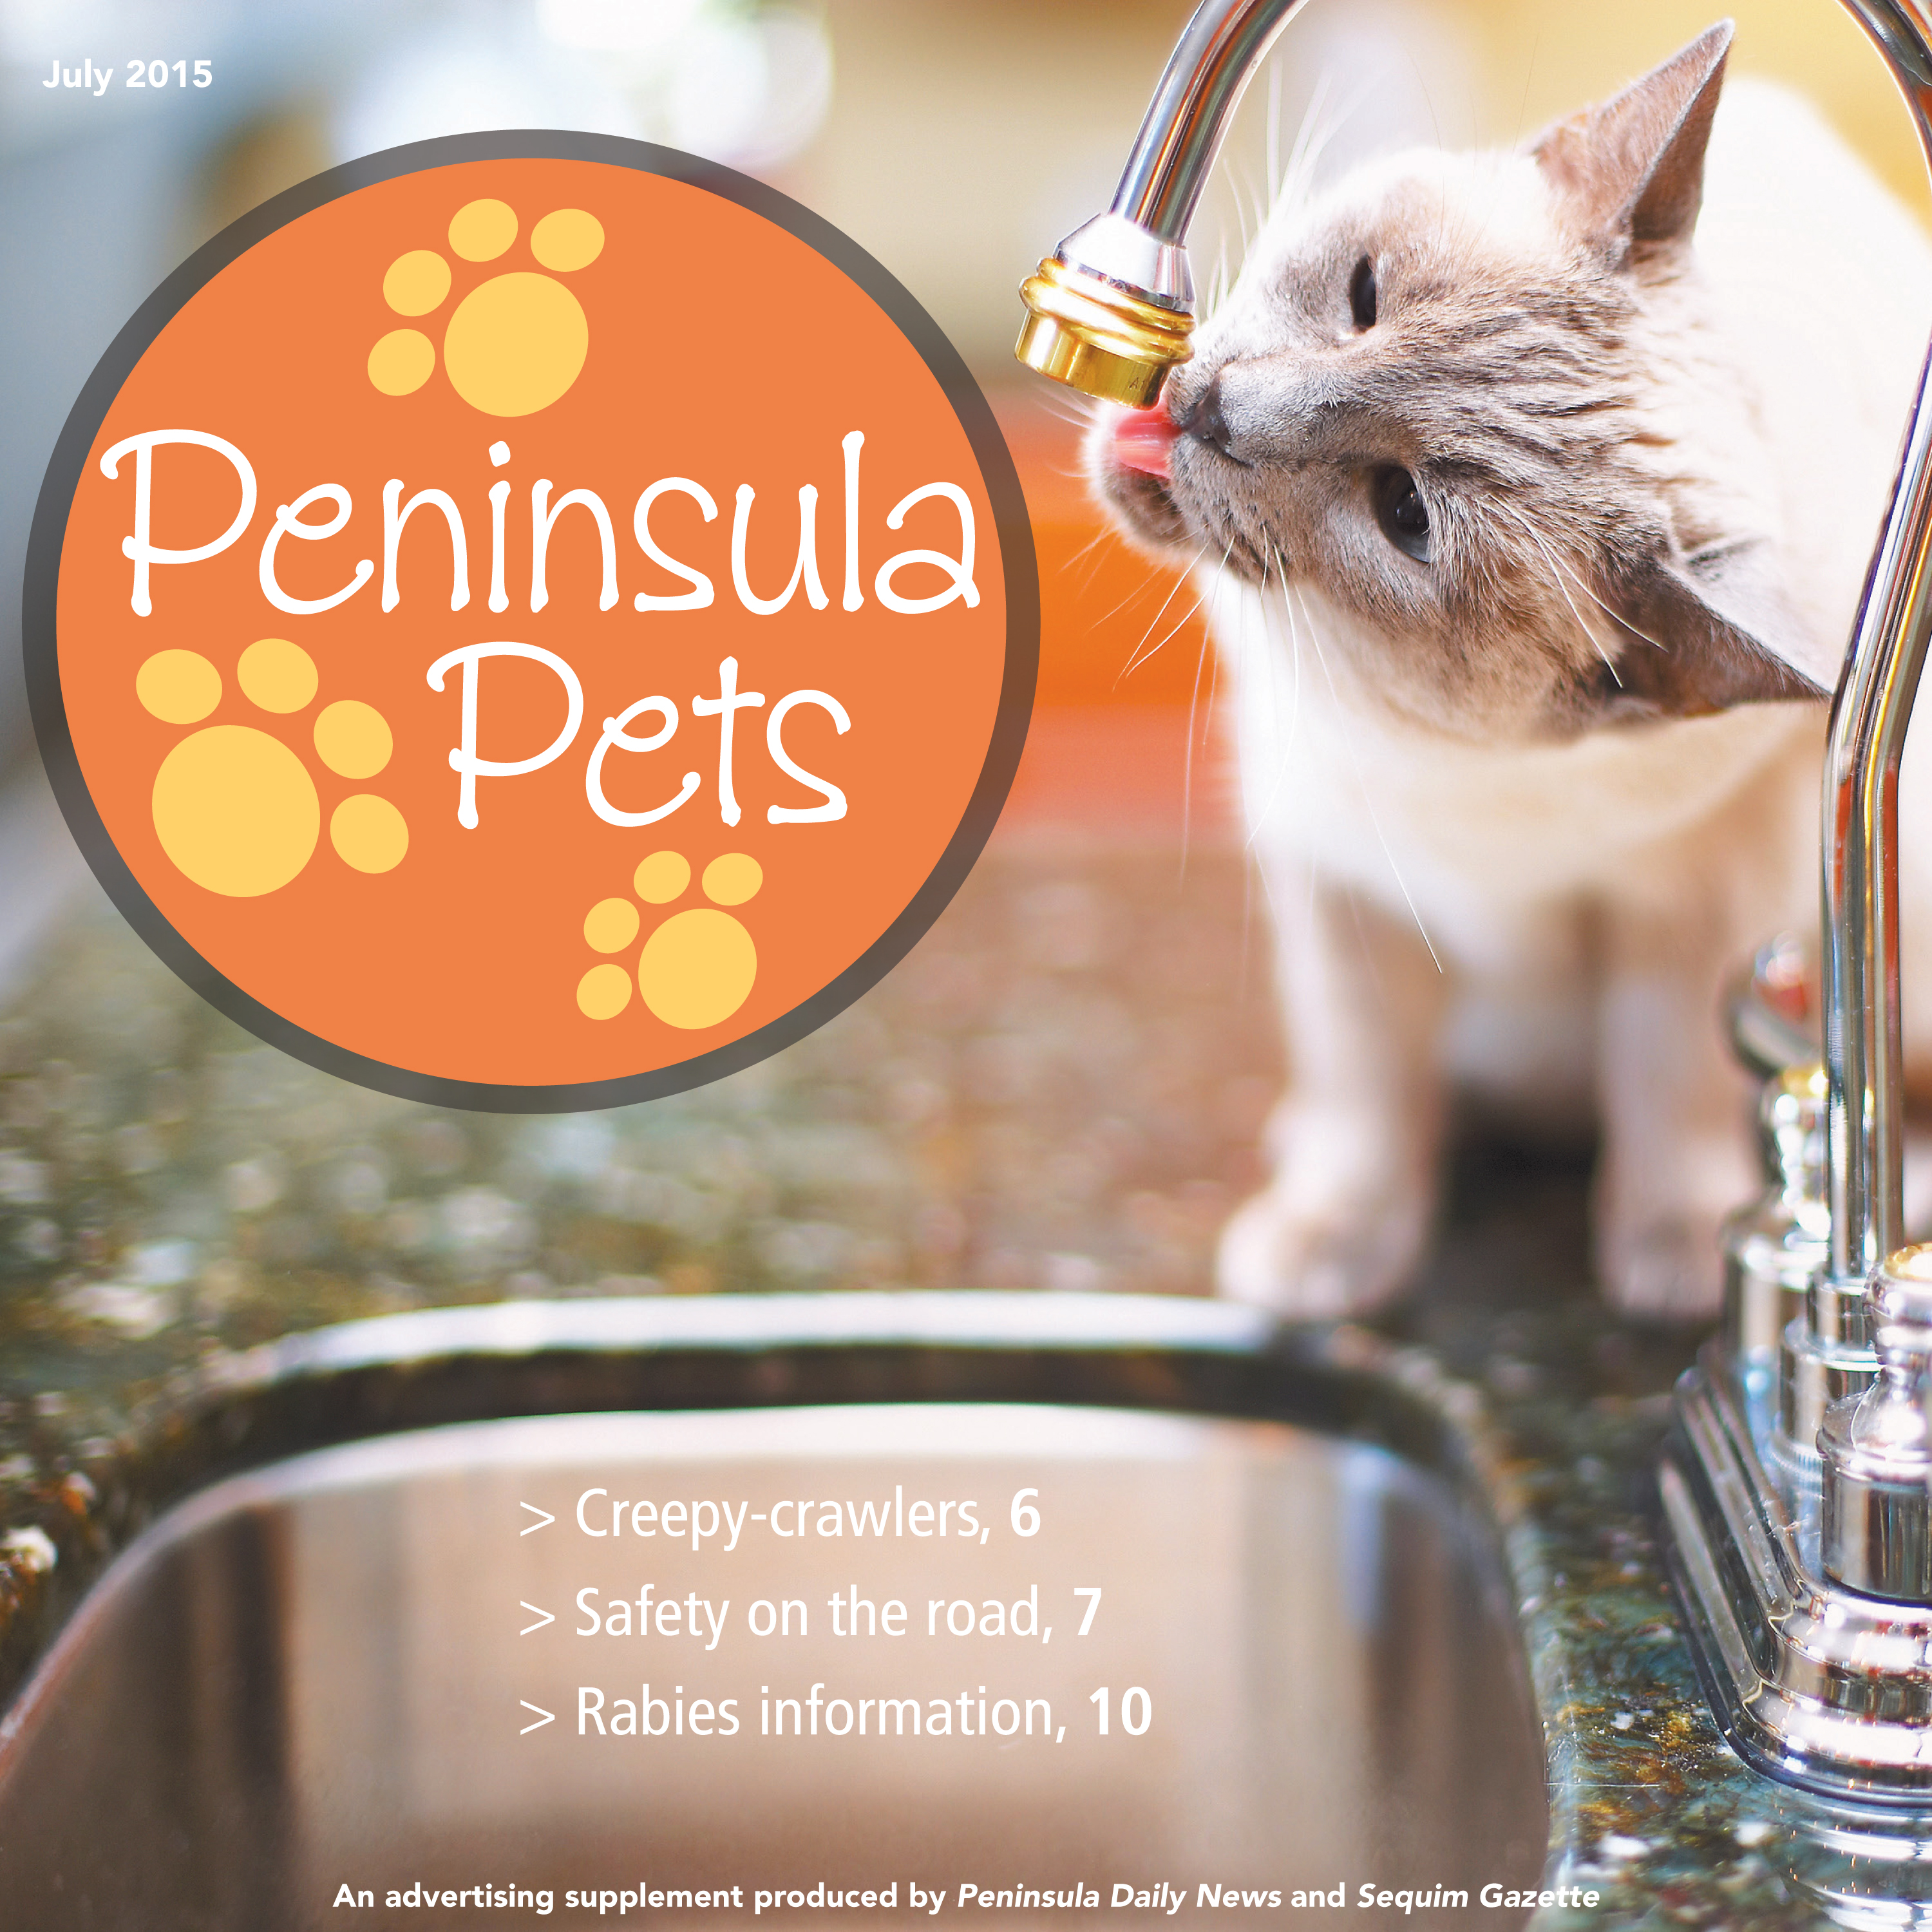 'Peninsula Pets' — another bonus publication in today's print PDN